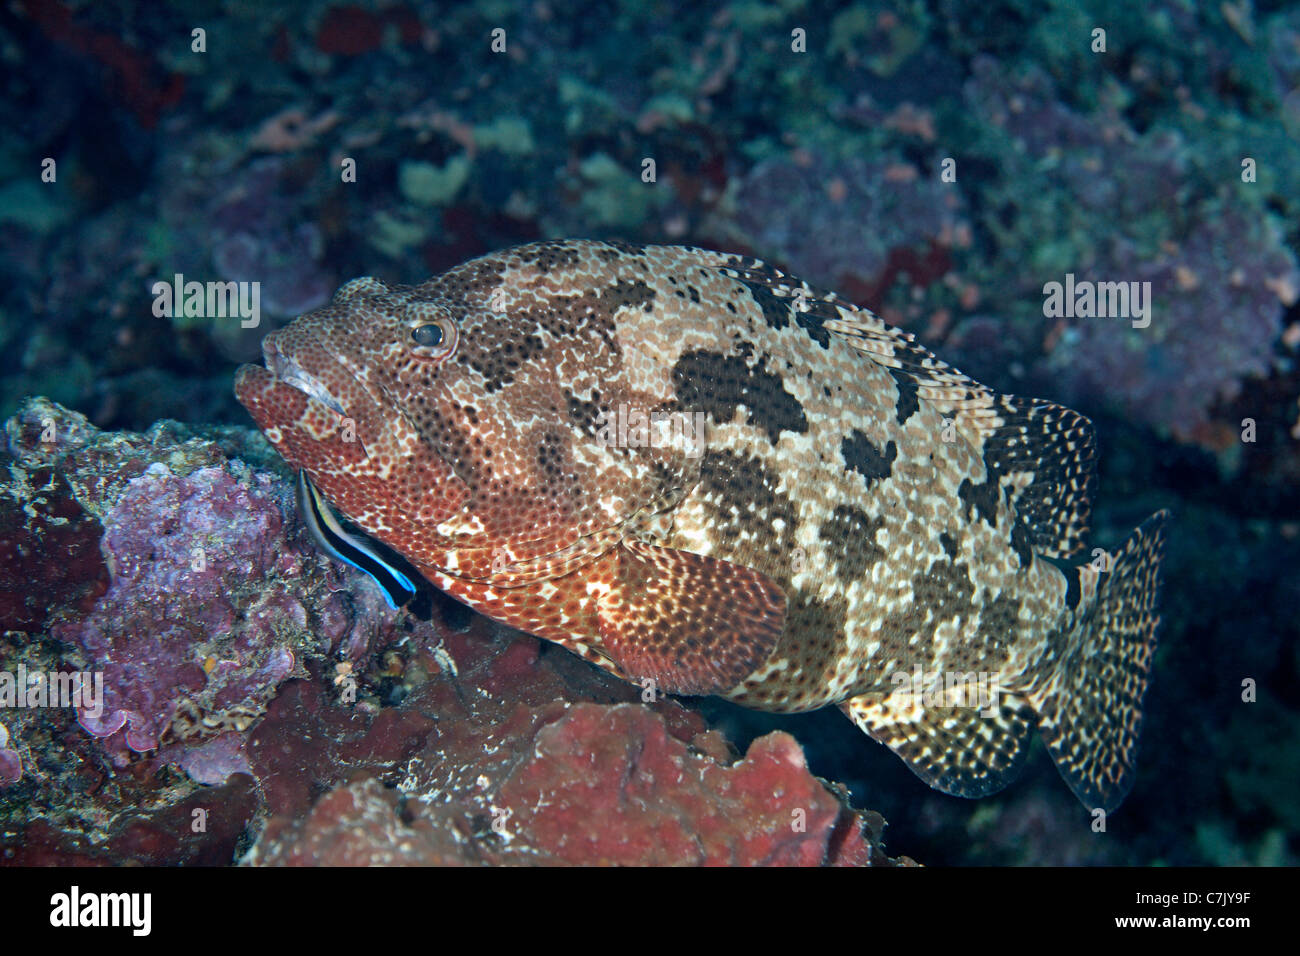 Brown-Marbled Grouper, Epinephelus fuscoguttatus, being cleaned by a Bluestreak Cleaner Fish, or Cleaner Wrasse, Labroides dimidiatus. Stock Photo